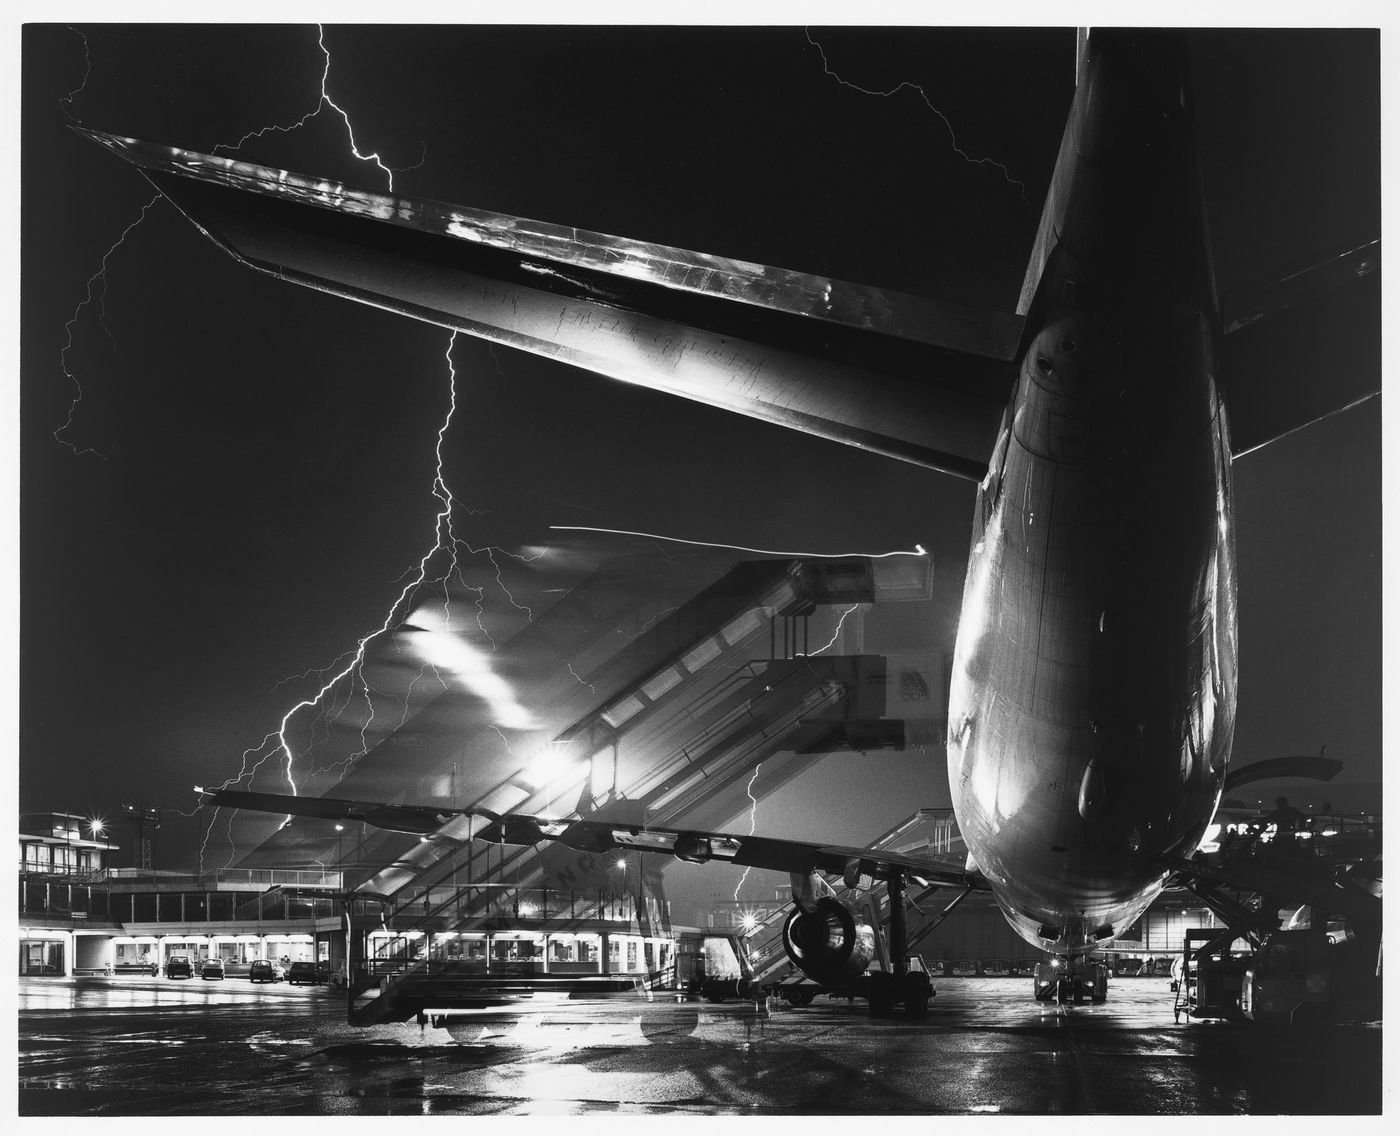 Night view of the Airport during a thunder storm, Milan, Italy